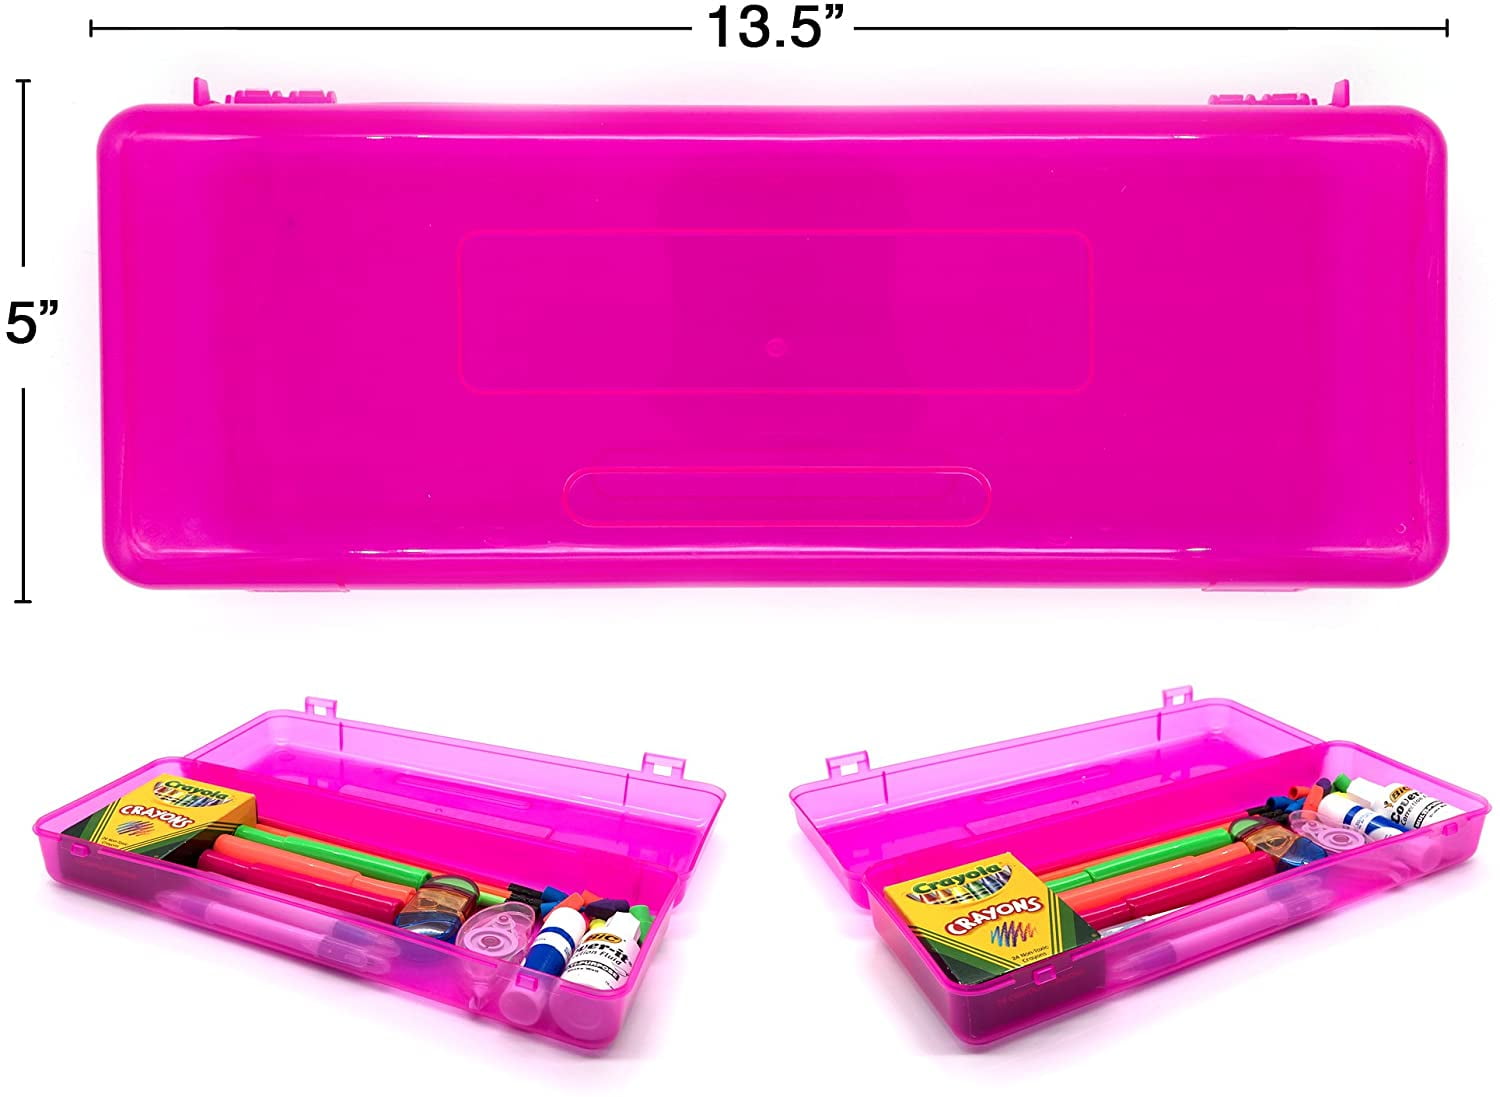 Xmmswdla 8-in-1 Small Pencil Case Pink Pensmall Pen Box Containing 5 Pencils 1 Eraser and 1 Ruler Suitable for Children As School Gifts or Birthday